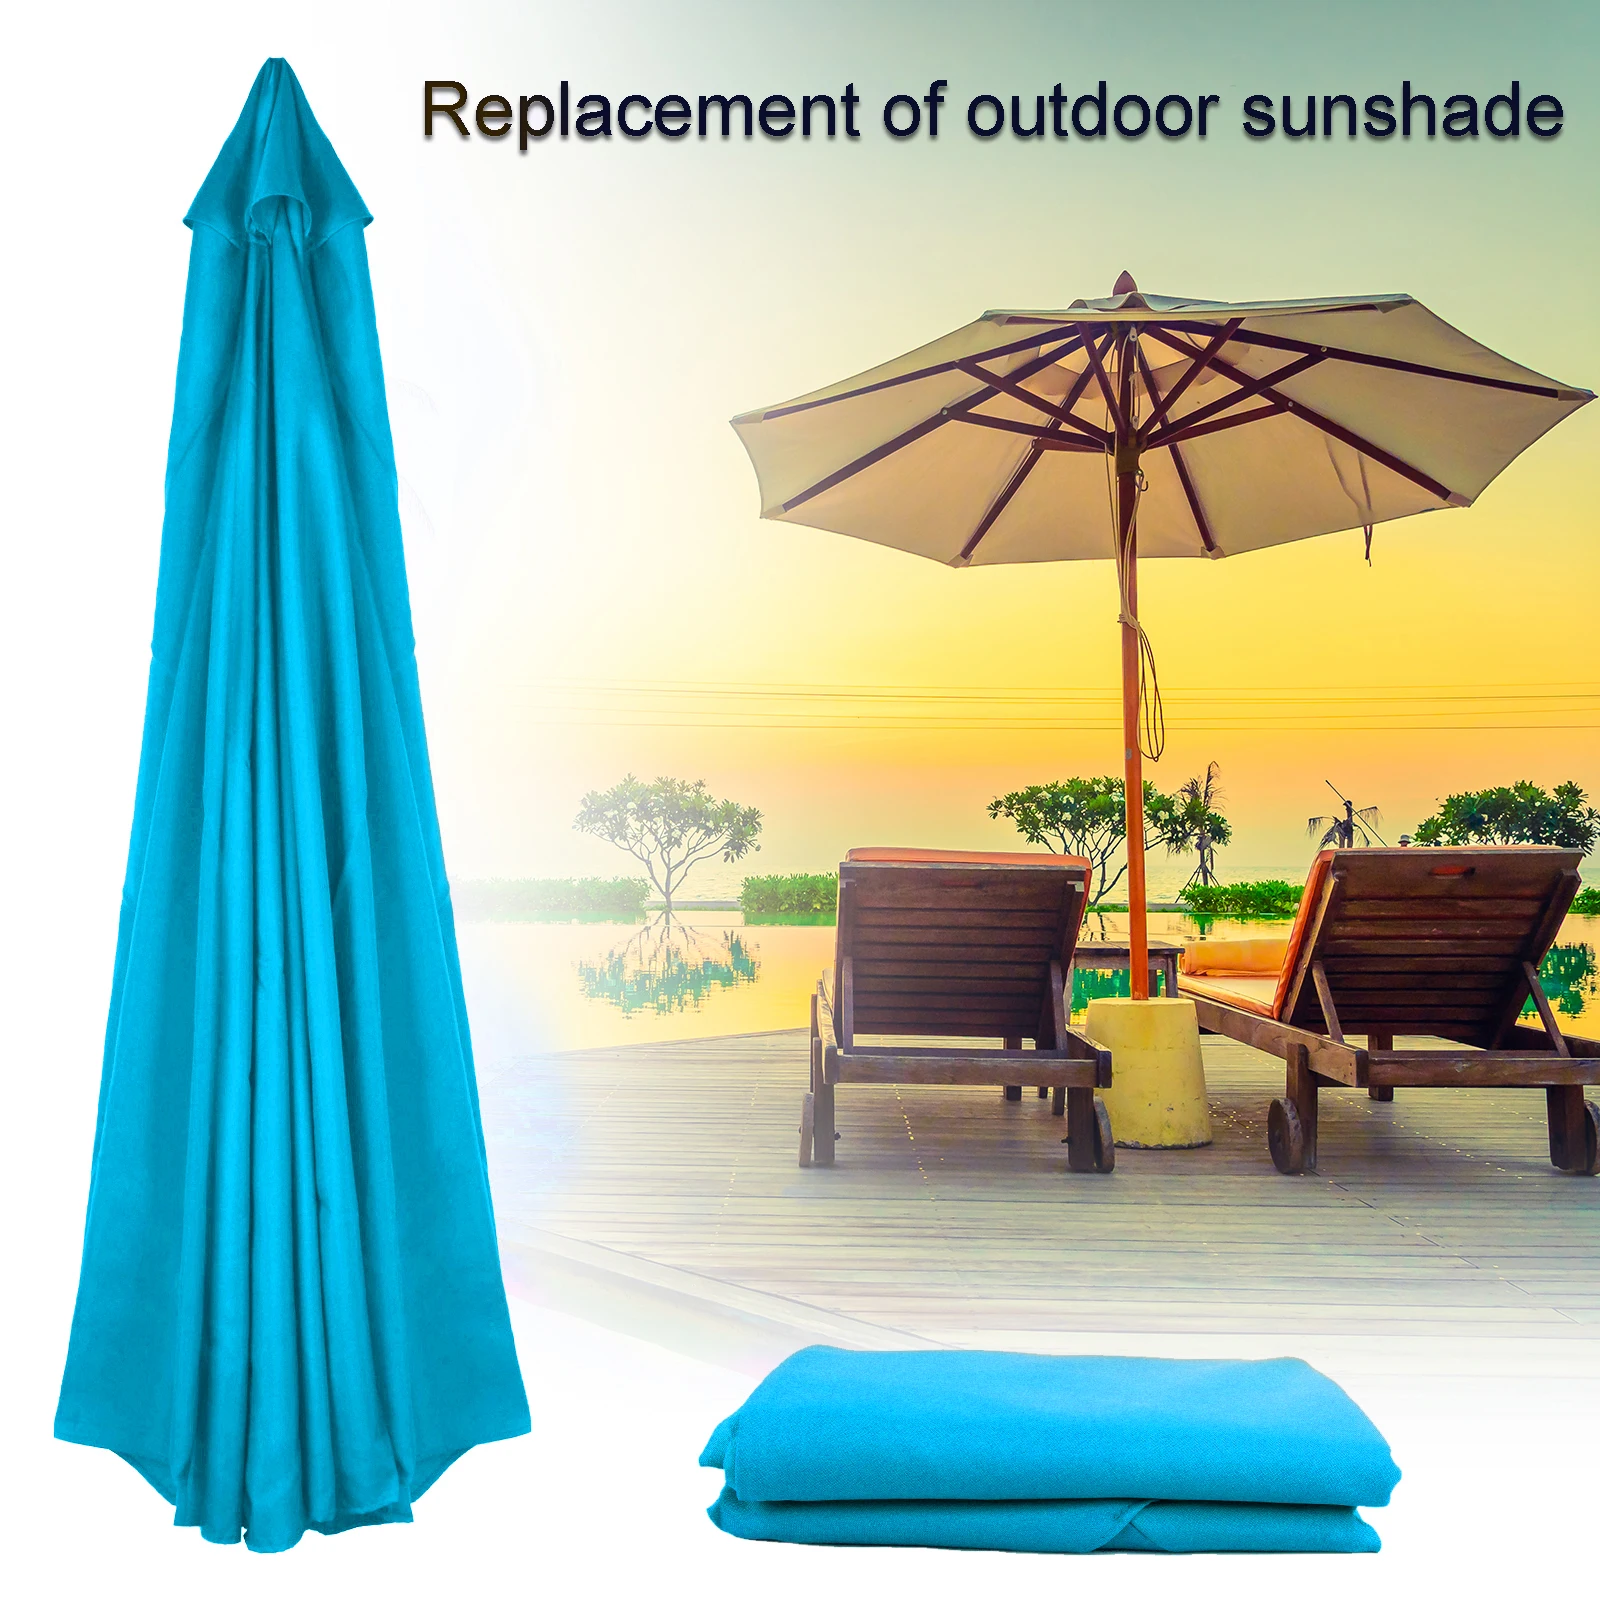 

Blue 2.7/3m Parasol Replaceable Cloth without Stand Outdoor Garden Patio Banana Umbrella Cover Waterproof Sunshade Canopy